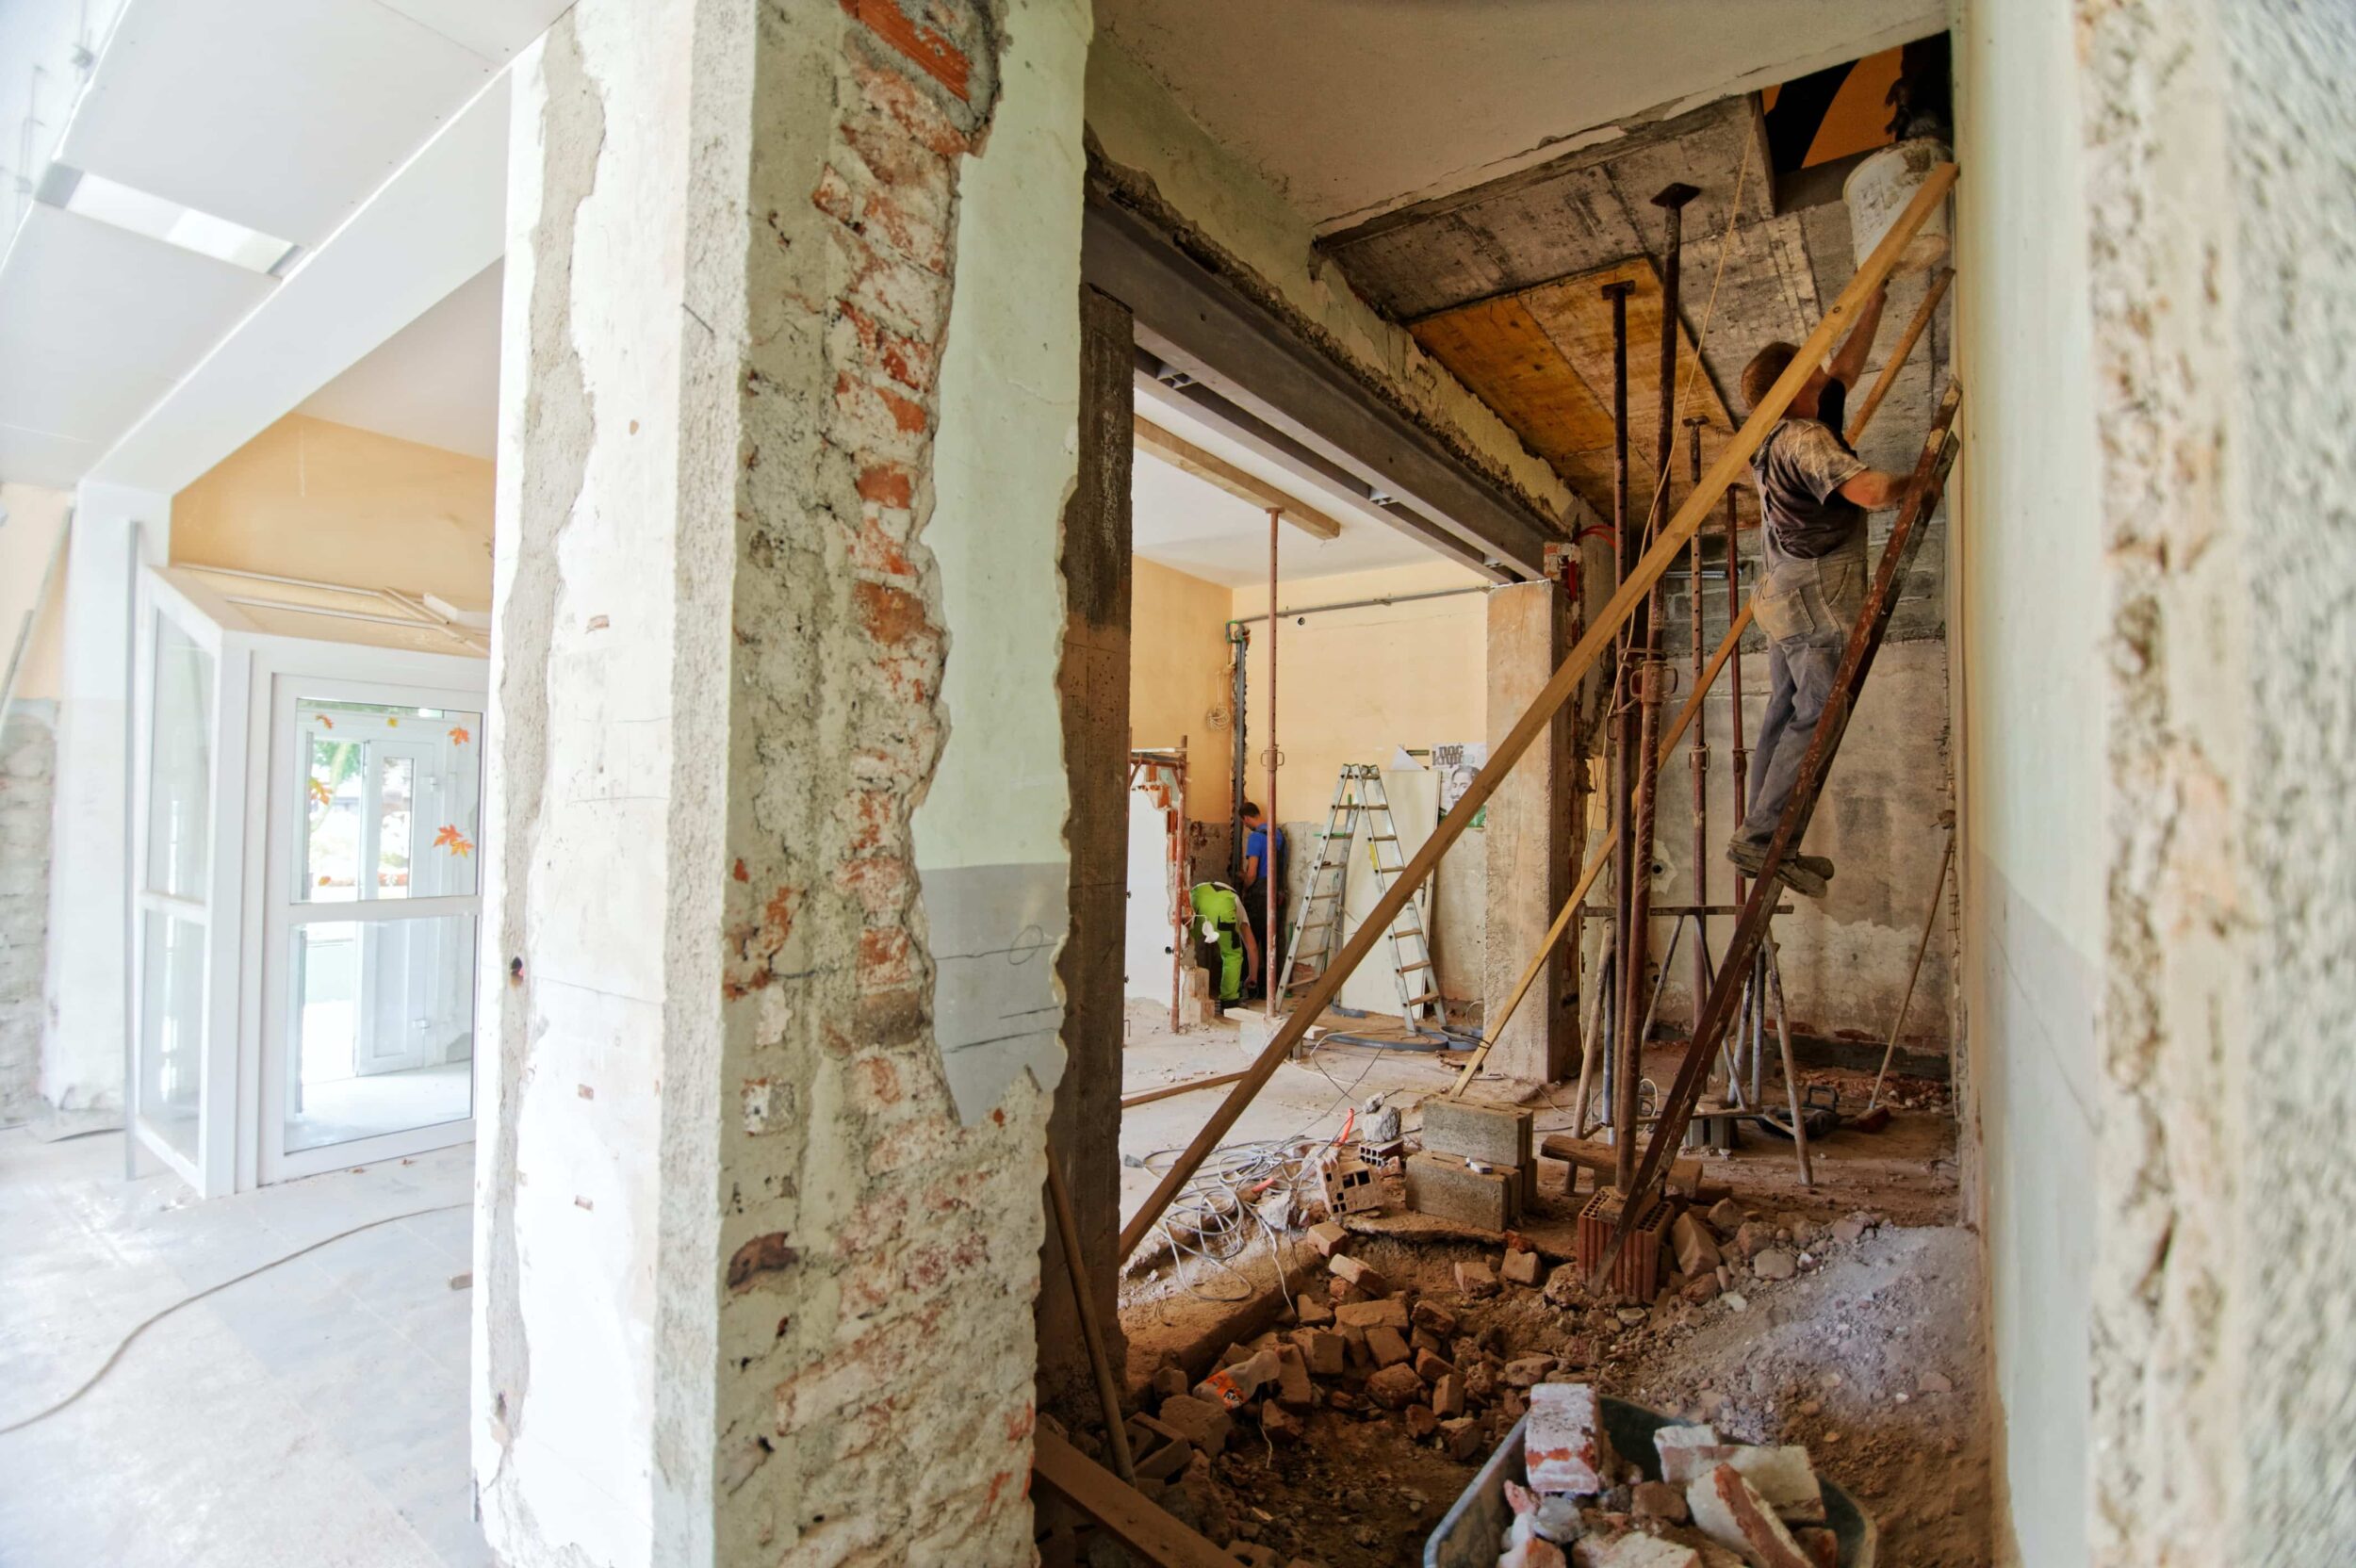 A home being renovated with workers inside a partly demolished house